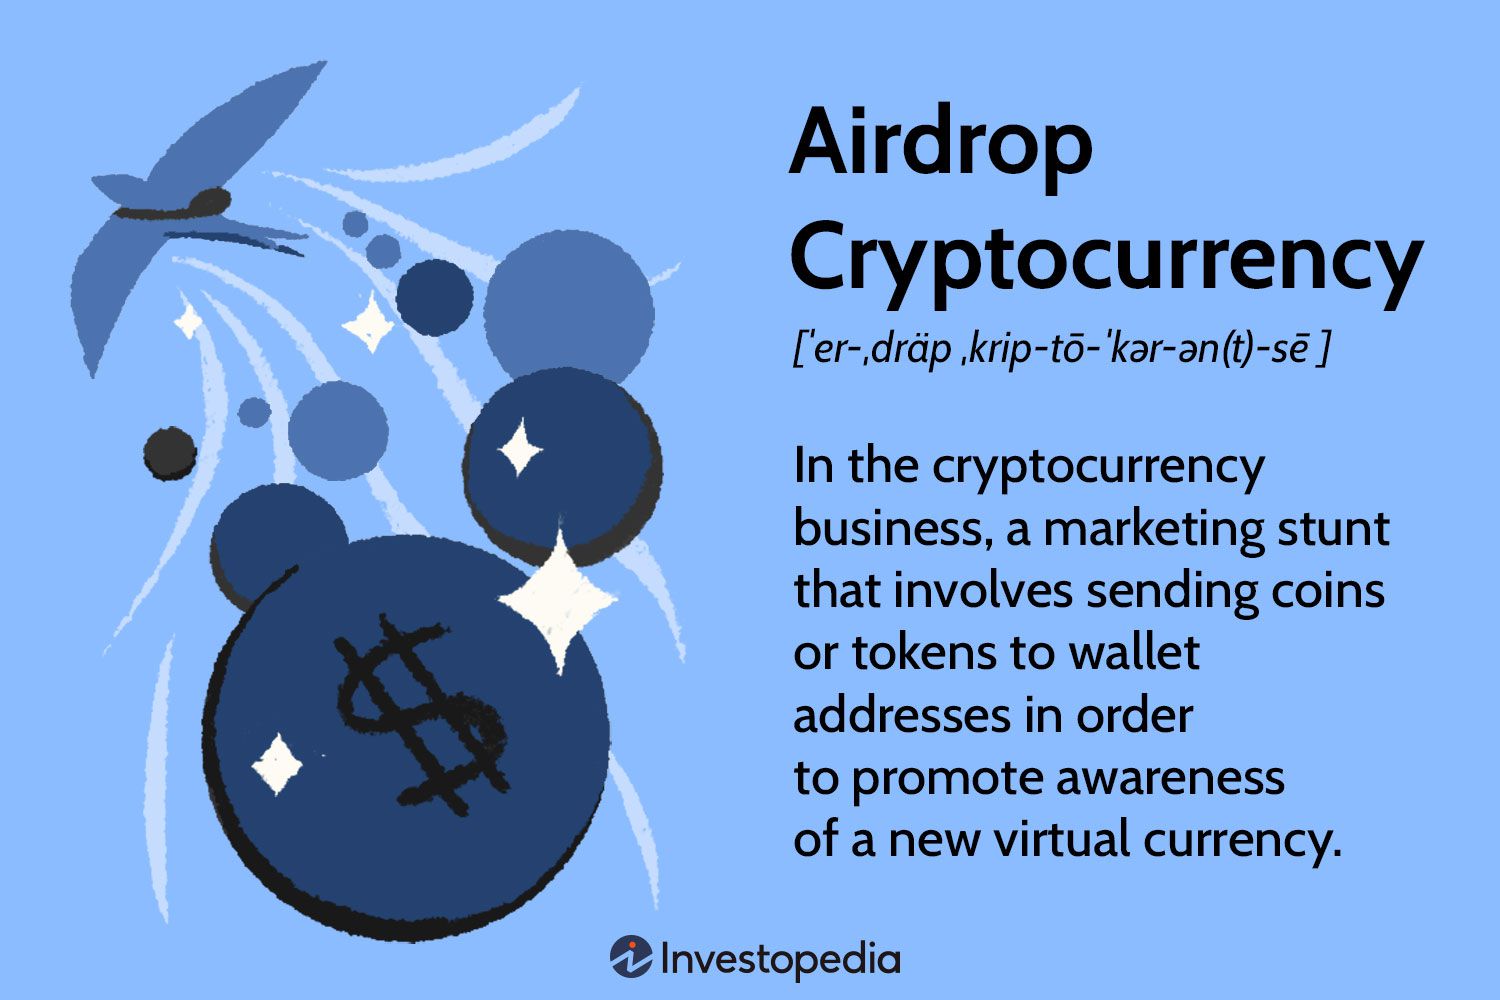 Airdrop (cryptocurrency) - Wikipedia